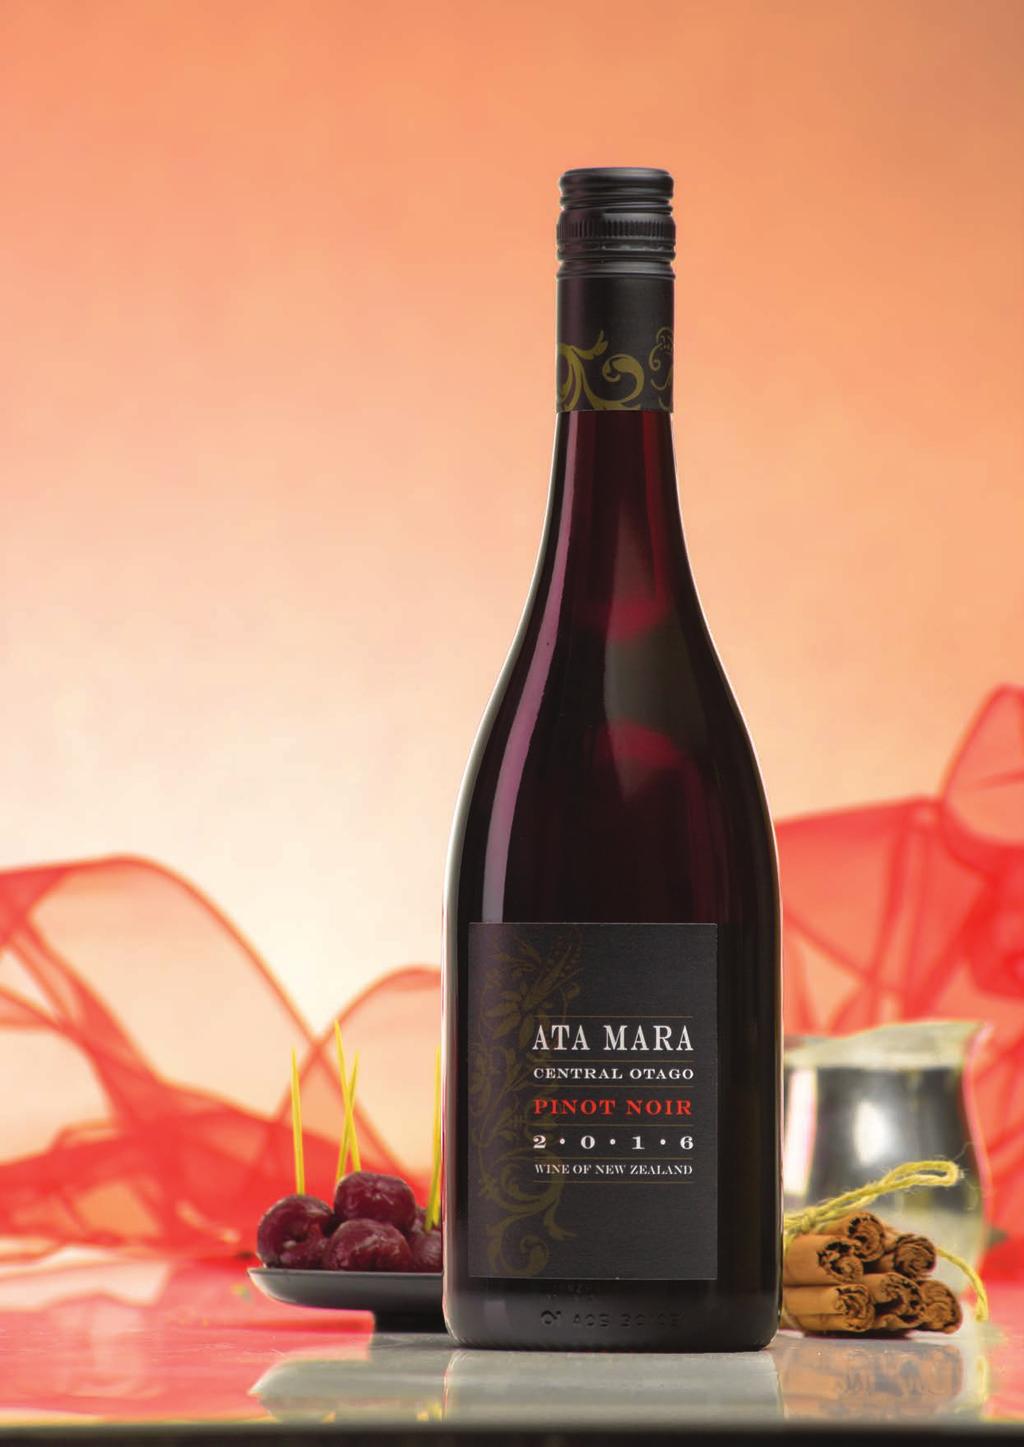 605 NZWS Solo: 03/8 N E W Z E A L A N D ATA MARA CENTRAL OTAGO PINOT NOIR Handpicked from a single vineyard The Ata Mara vineyard sits on the Wanaka-Cromwell highway and boasts the clay soils that